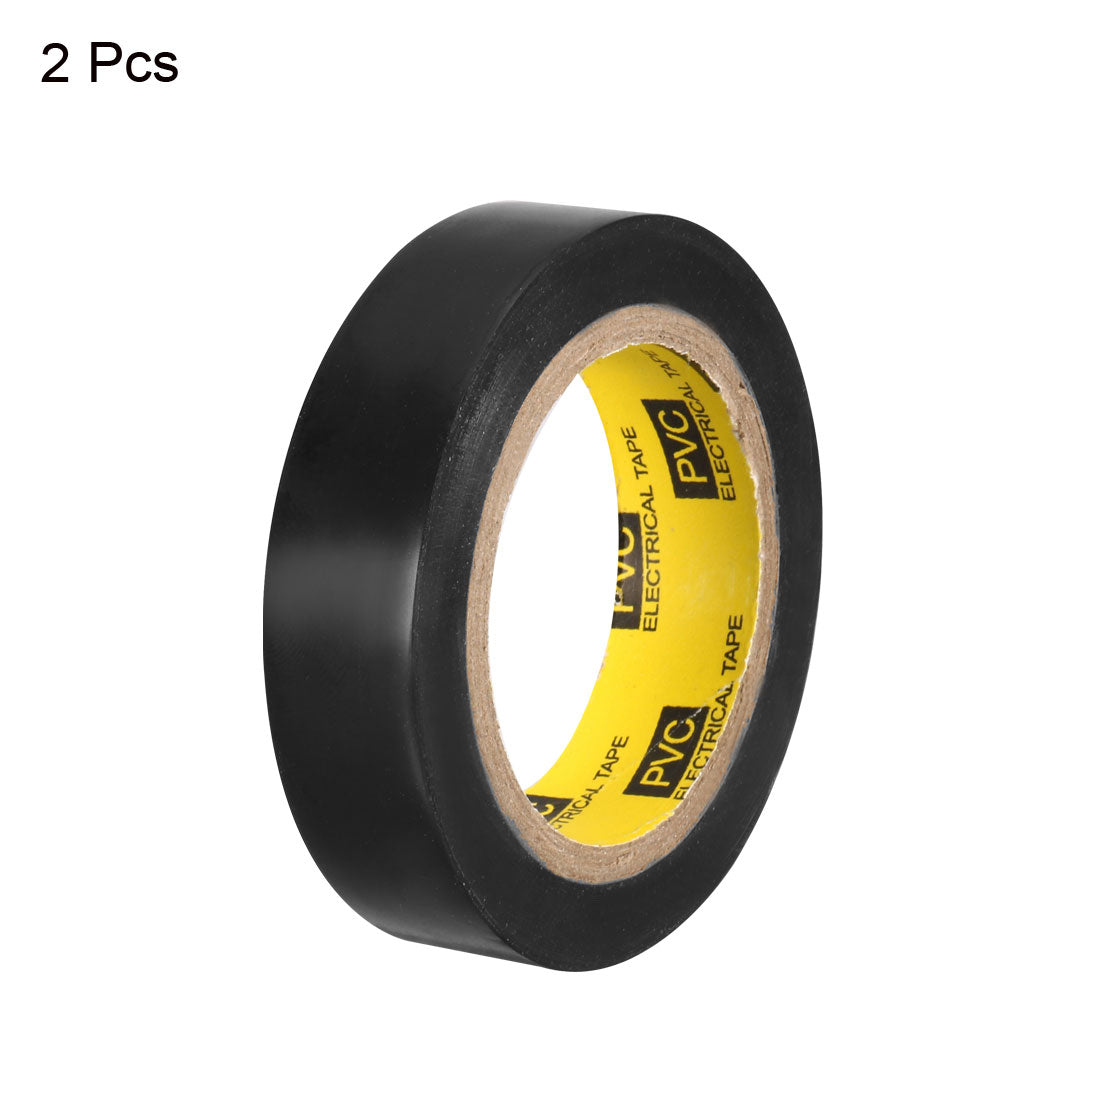 uxcell Uxcell Insulating Tape 16mm Width 9M Long 0.18mm Thick PVC Electrical Tape Black 2pcs